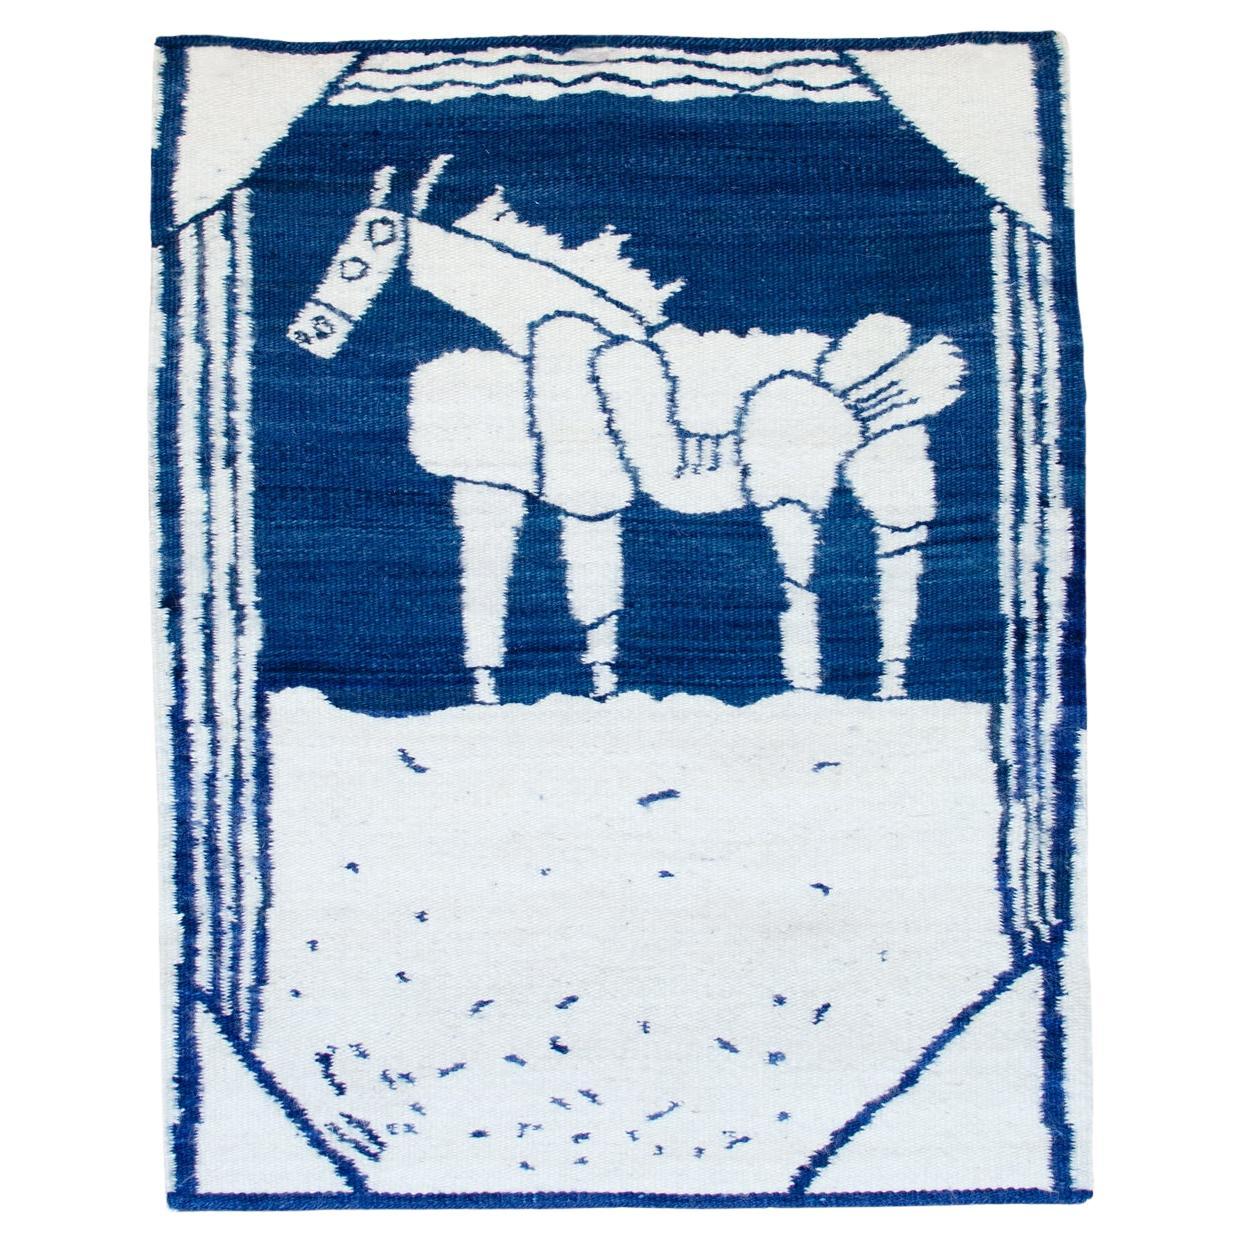 Hand-woven wool rug "Stage Horse" by Luis Fernando Benedit